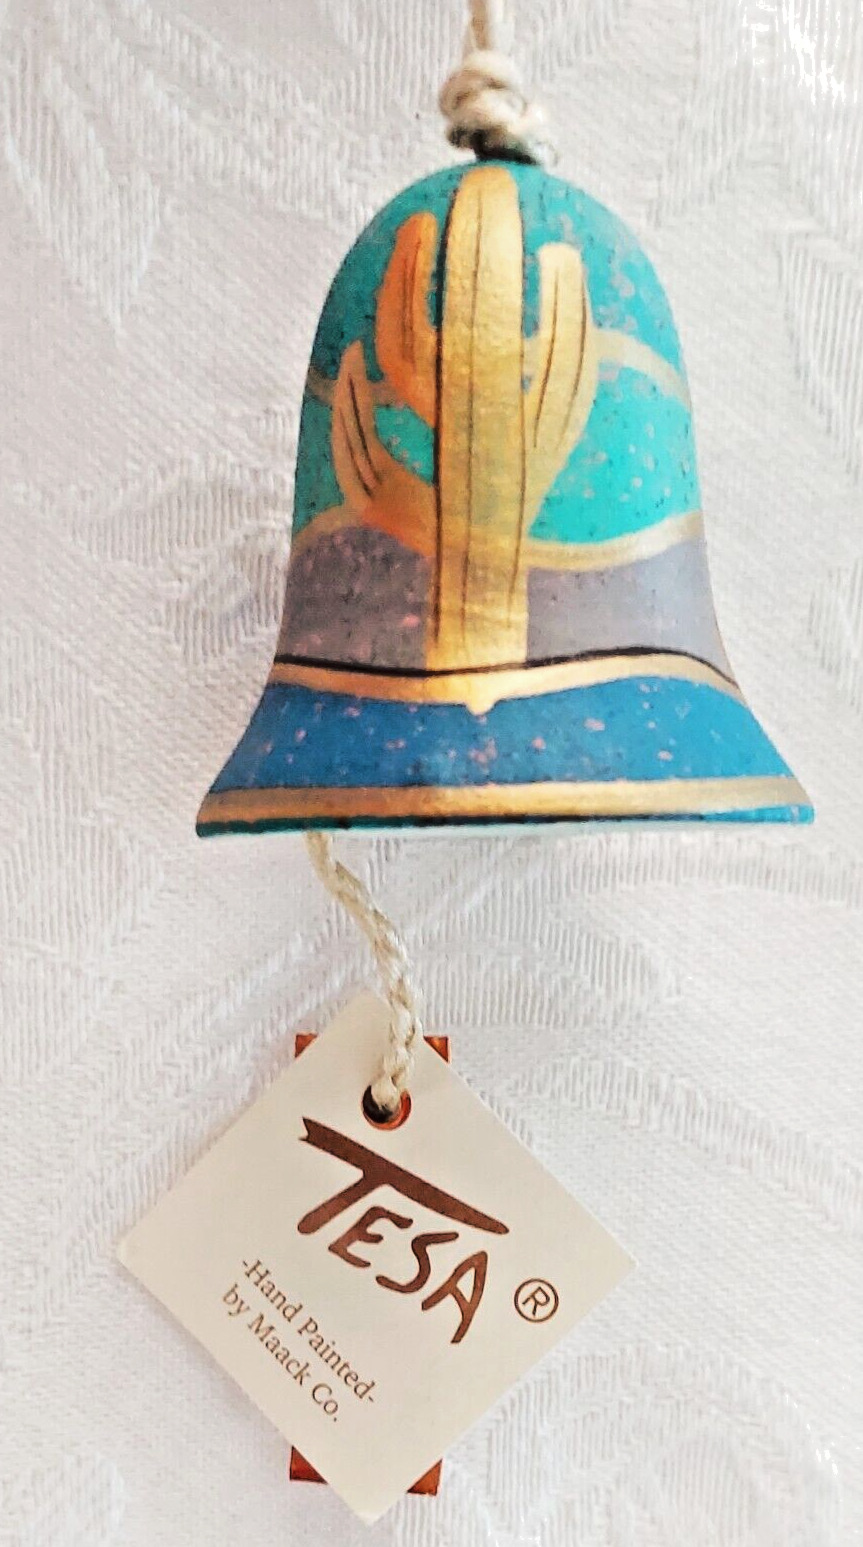 Vintage TESA Southwest Pottery Saguaro Bell Wind Chime Hand-painted 2 inch